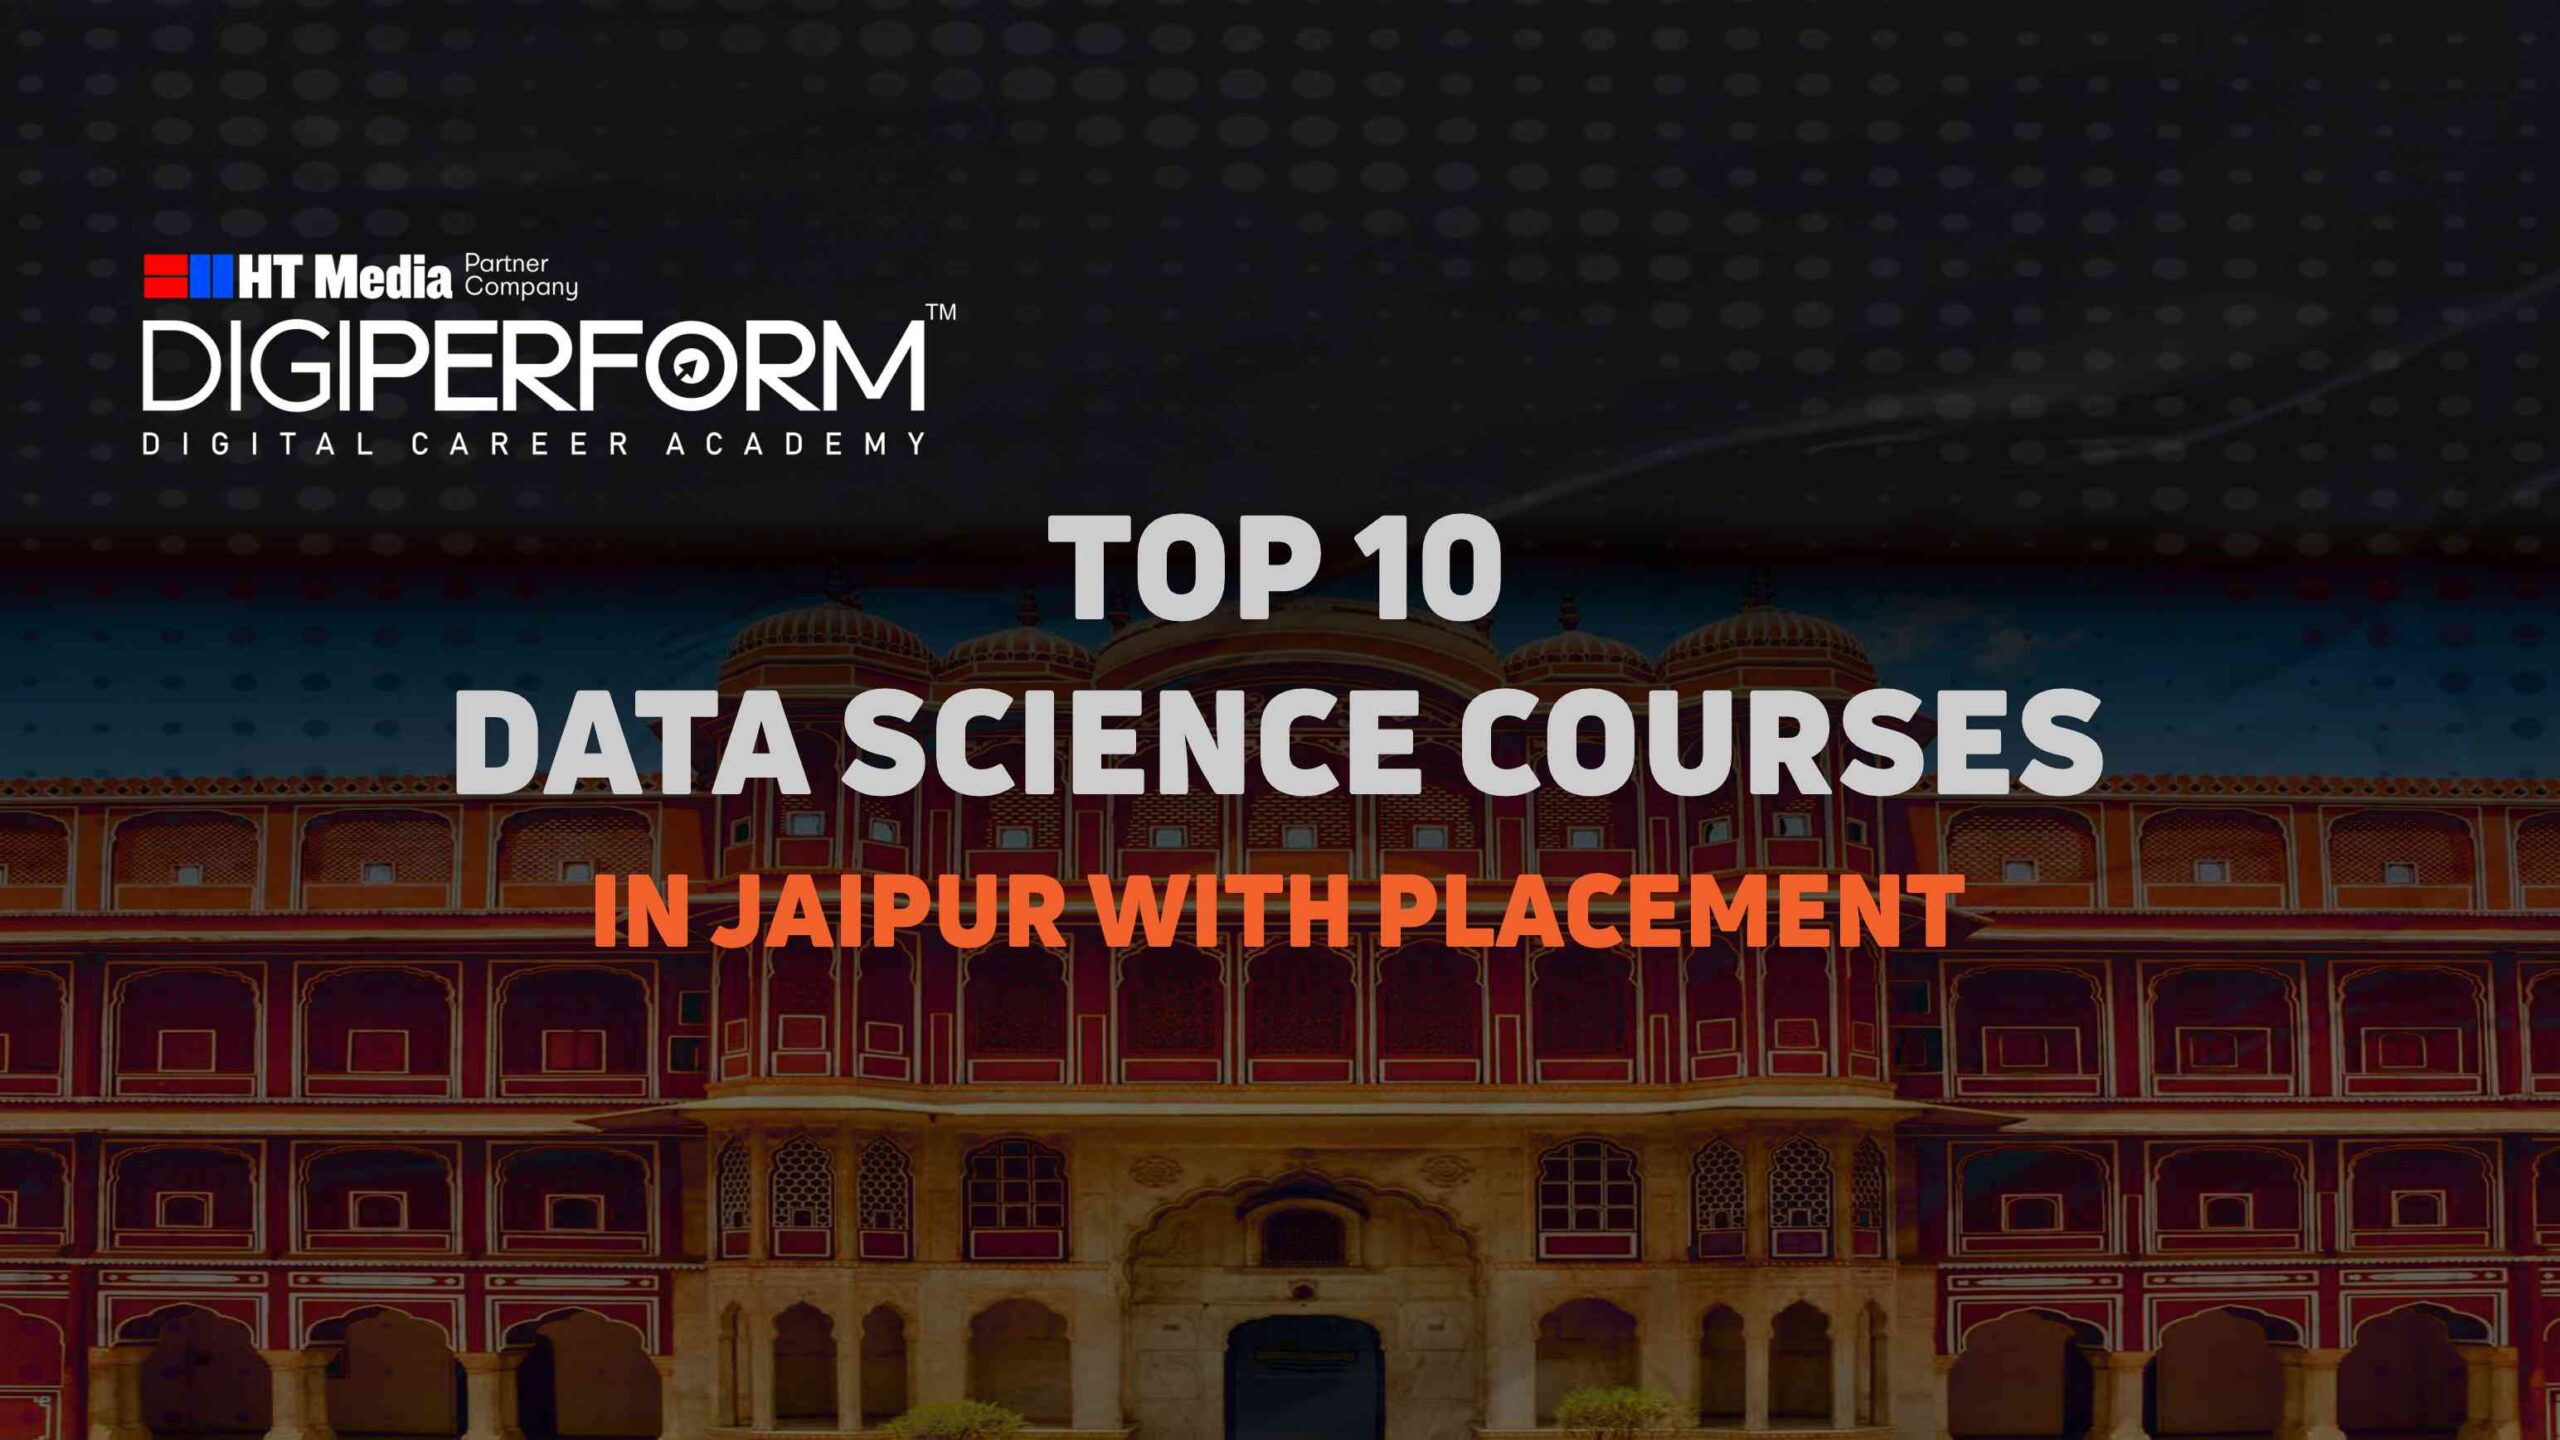 Top 10 Data Science Courses in Jaipur with Placement